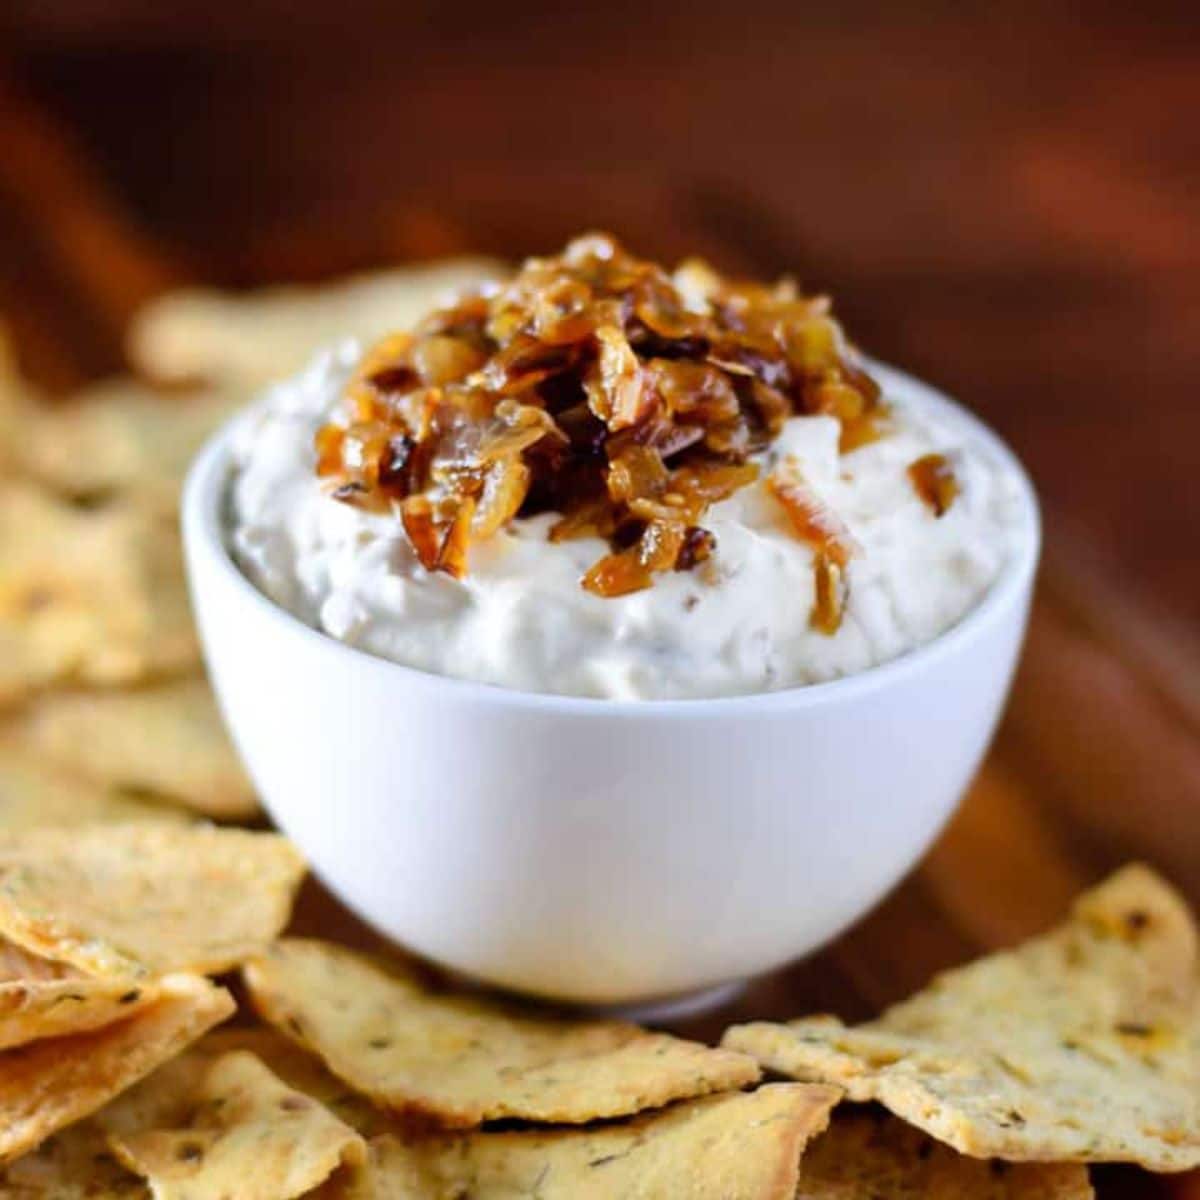 Skinny French Onion Dip in a white bowl.